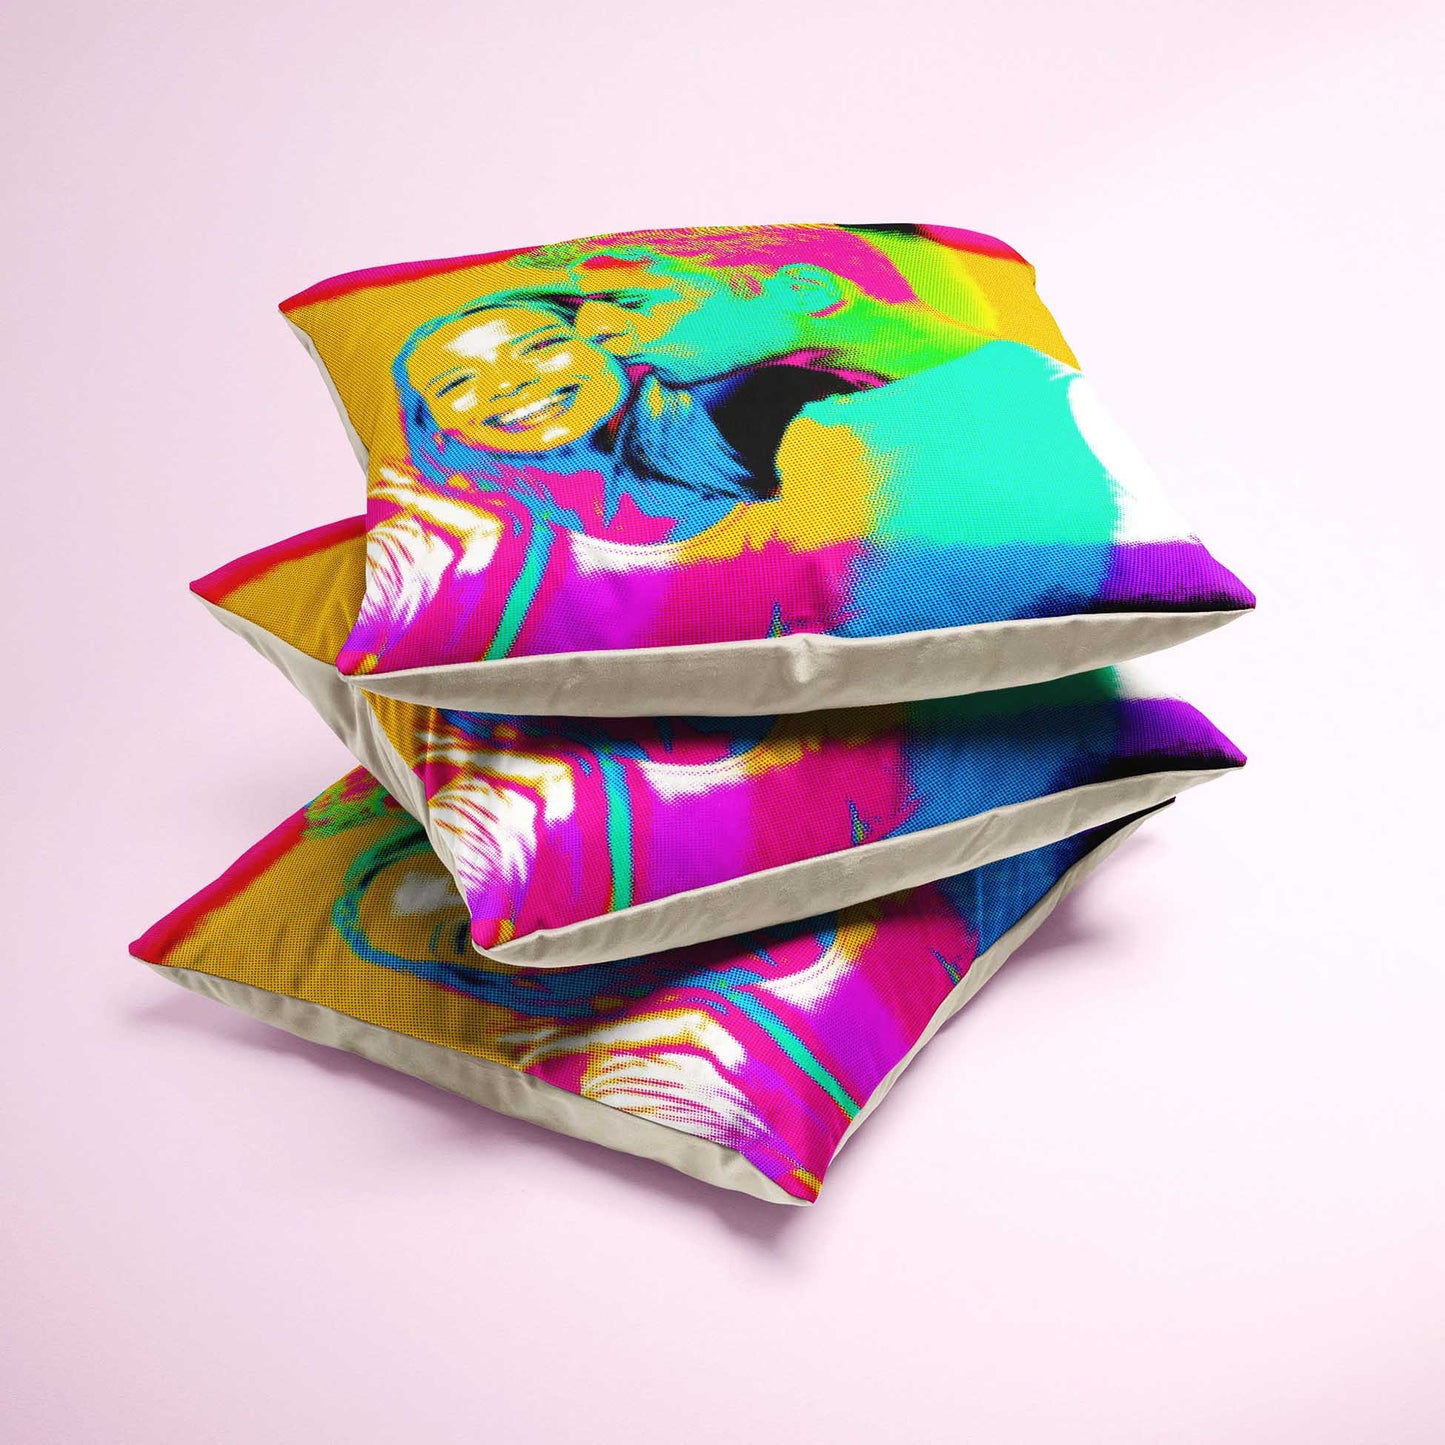 Experience the cool and creative vibes with the Personalised Pop Art Cushion. Printed from your photo, it features a unique and quirky design that sparks imagination. Handmade with soft velvet, it offers luxury and comfort